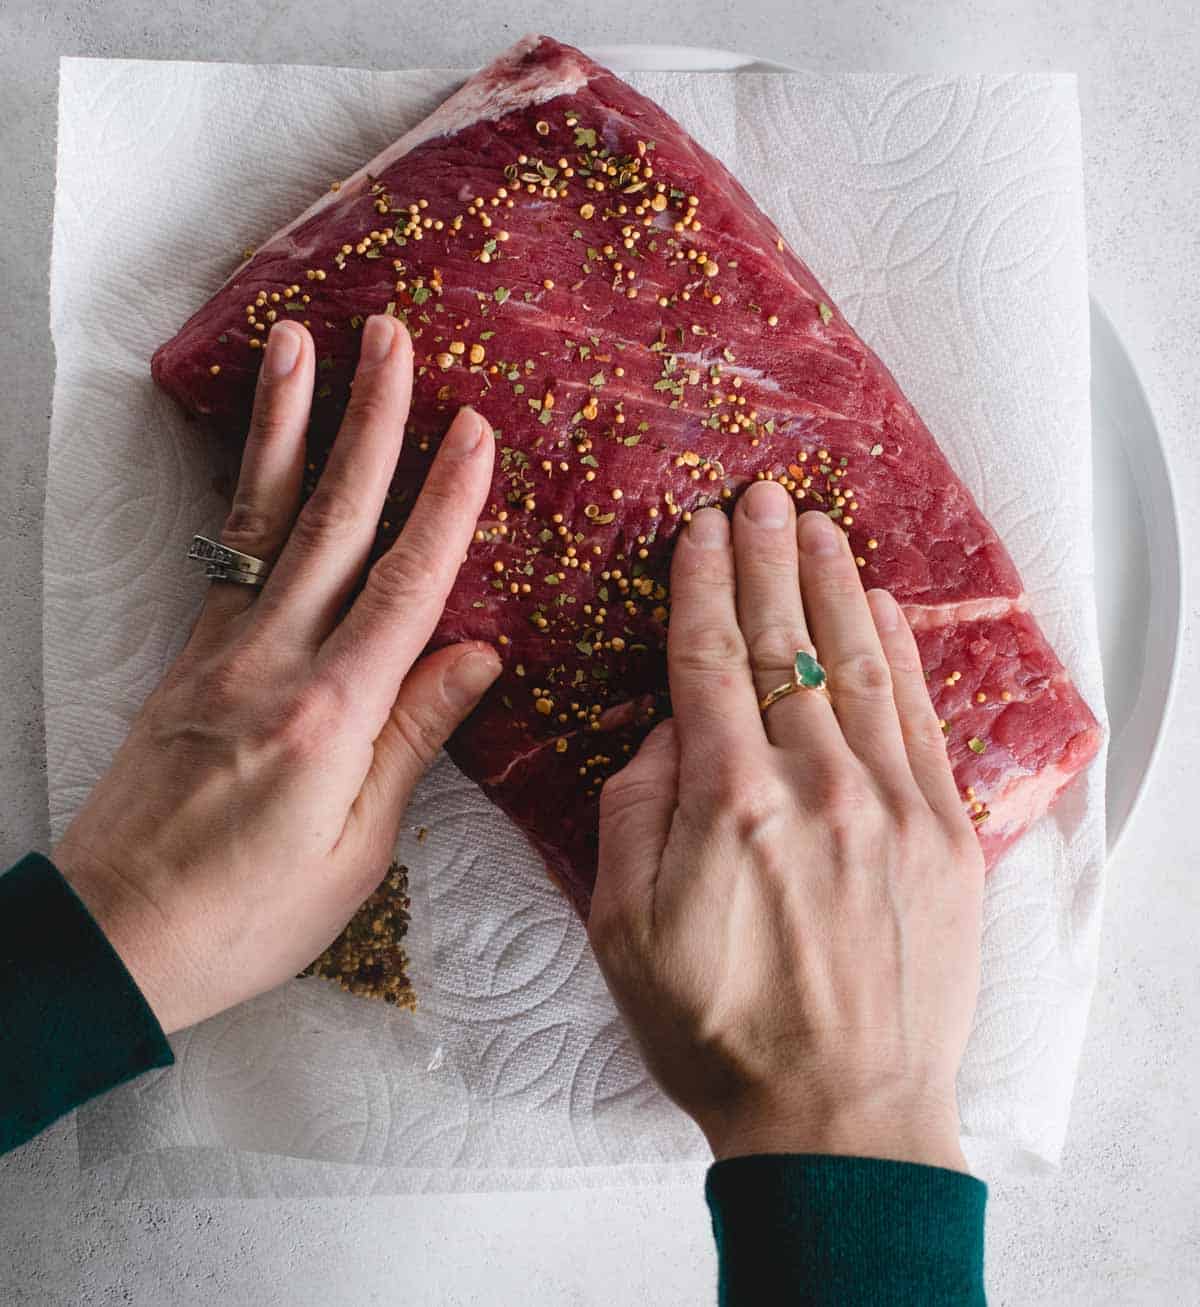 Hands rubbing spices onto corned beef